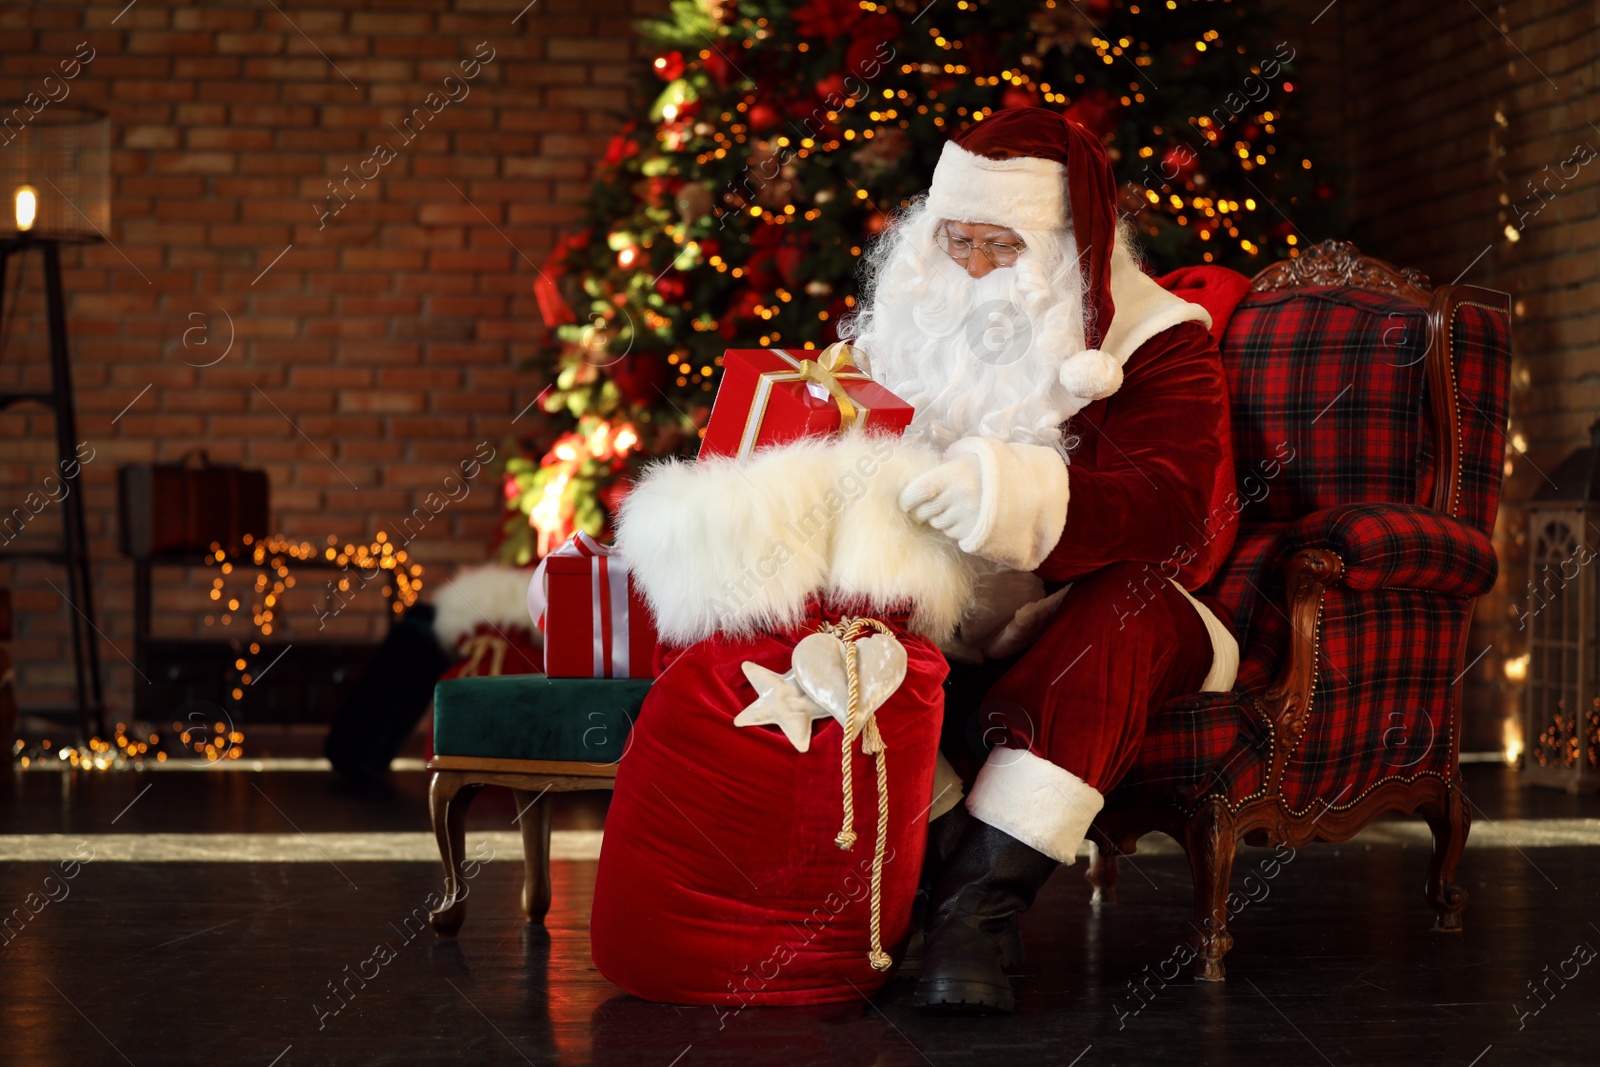 Photo of Santa Claus with gift sack near Christmas tree indoors